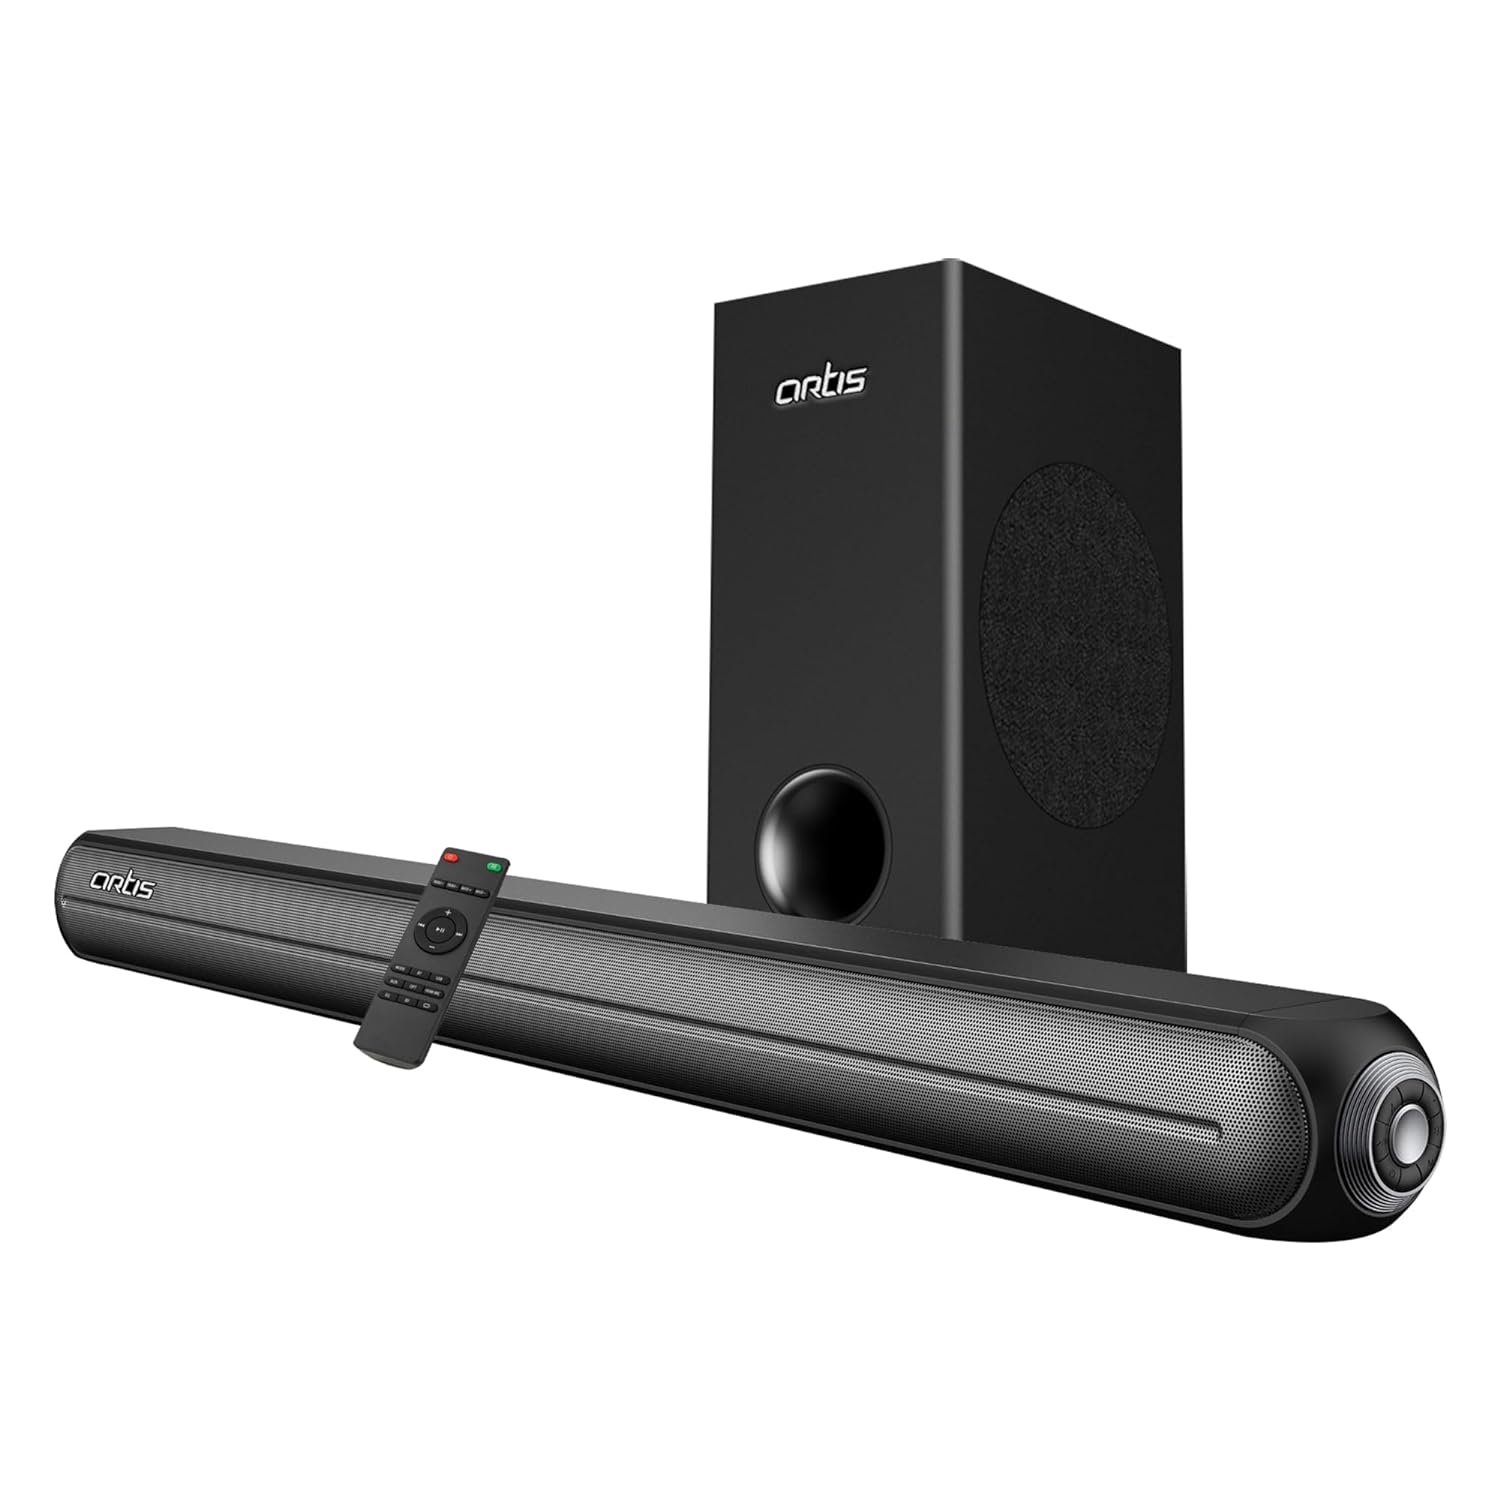 Artis X700 2.1 CH 120 Watts Bluetooth Sound bar with Wired Subwoofer & Multiple Input Modes: Bluetooth/HDMI (ARC) / AUX in/Optical/USB Pen Drive Input